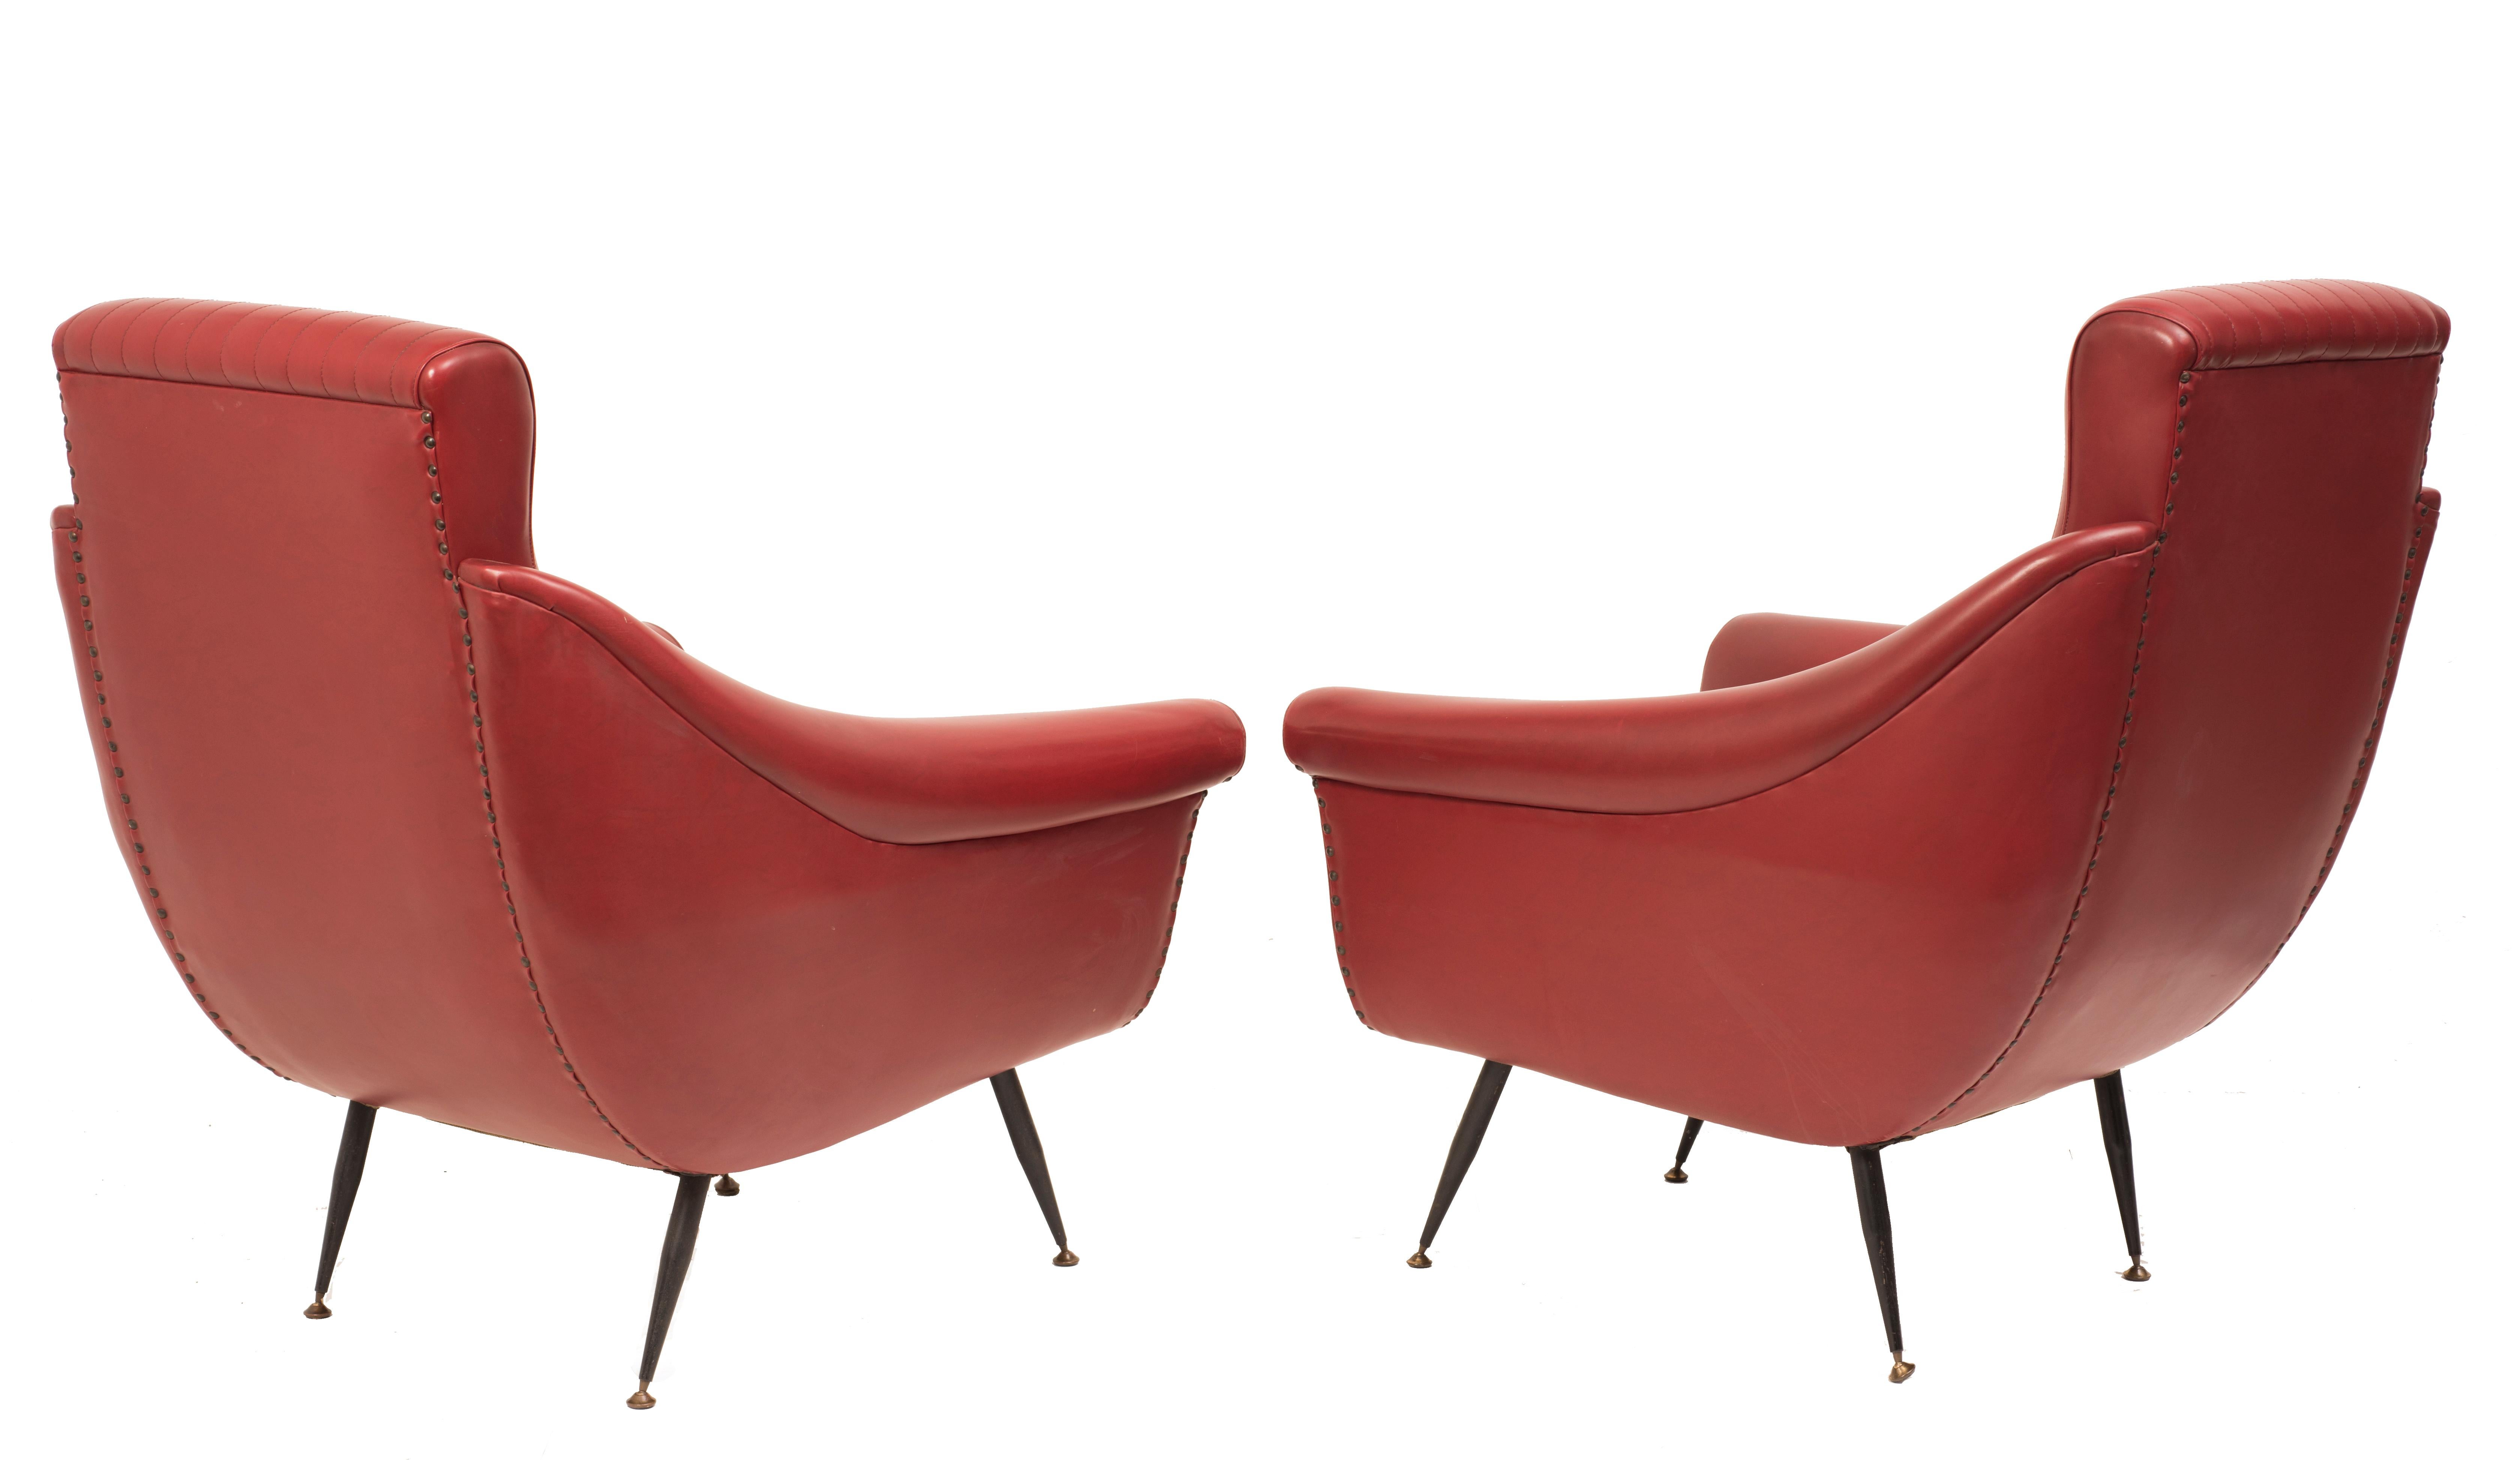 Industrial Vintage Pair of Armchairs, Italian Manufacture, 1950s For Sale